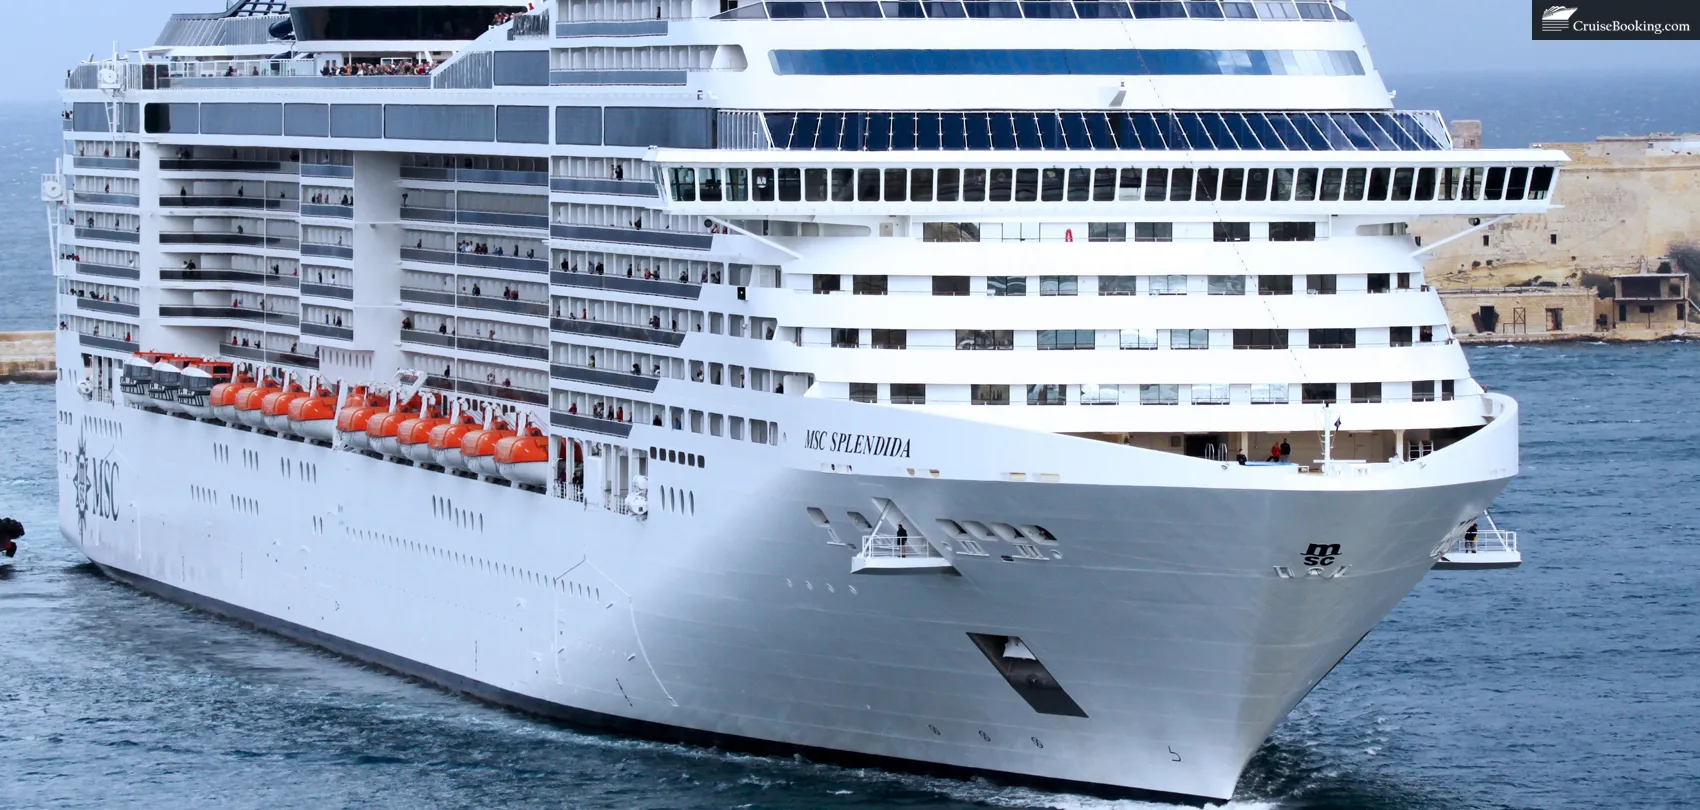 MSC Splendida Completes 15 Years of Service this Month